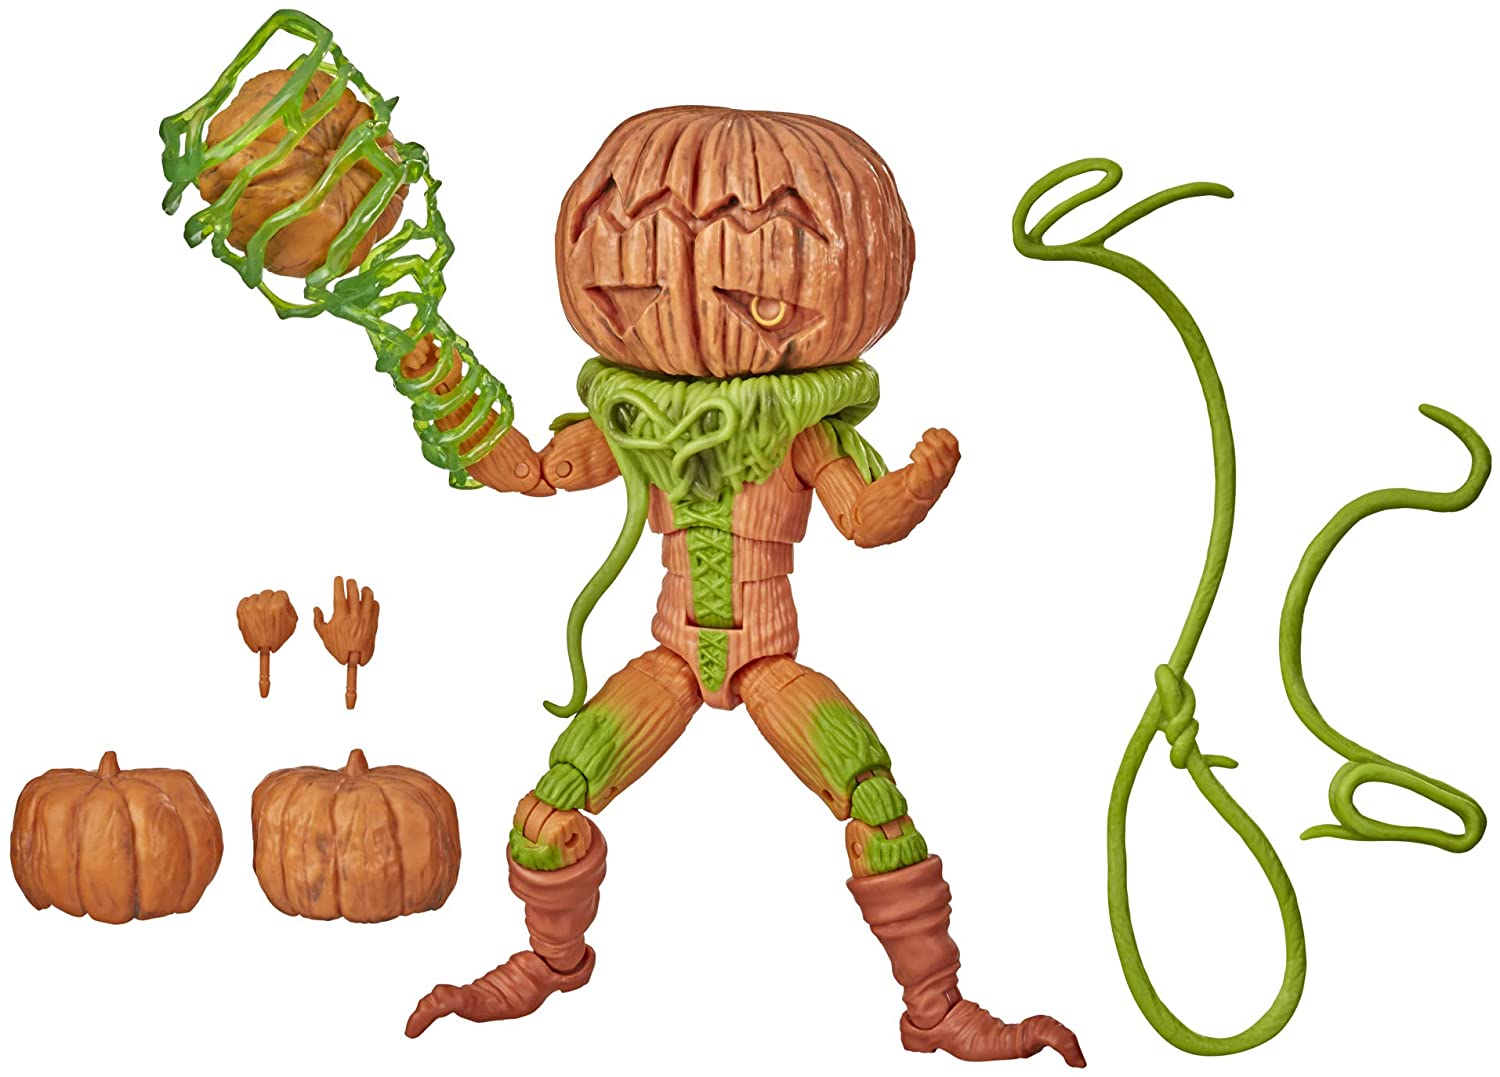 Power Rangers Lightning Collection Monsters Mighty Morphin Pumpkin Rapper 8-Inch (Amazon)